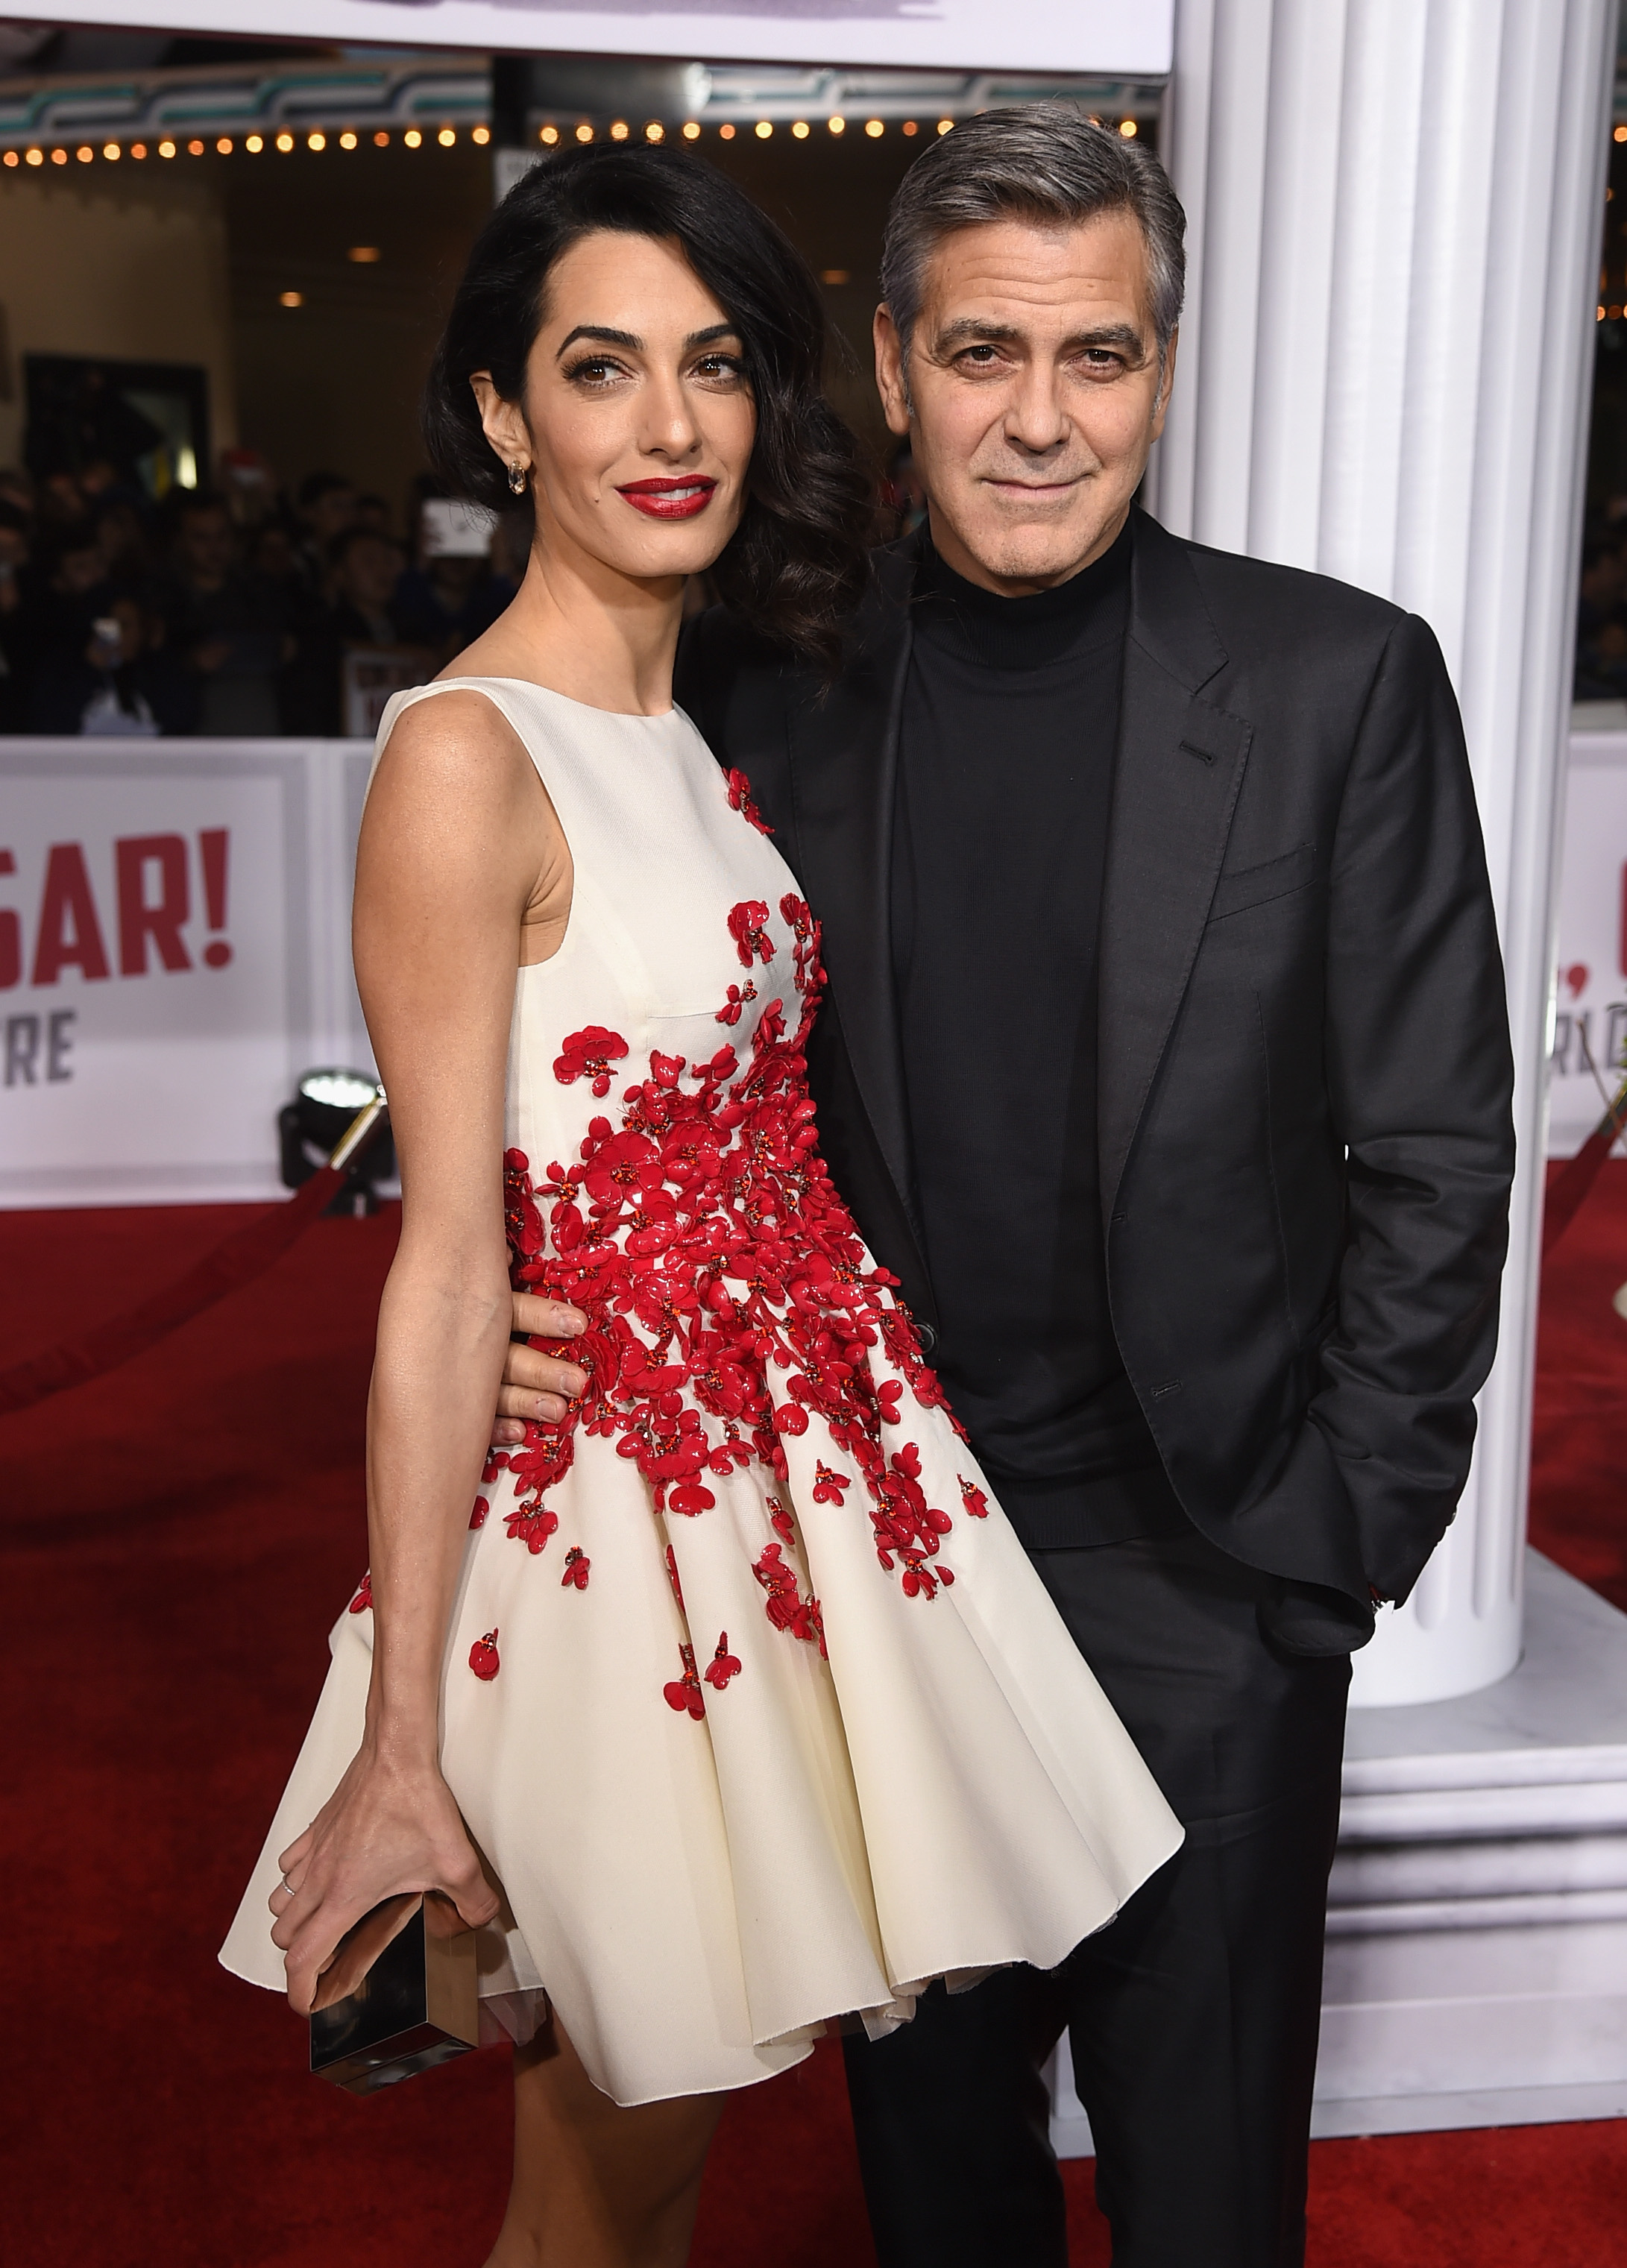 Amal and George Clooney at the premiere of "Hail, Caesar!" in Westwood, California on February 1, 2016 | Source: Getty Images